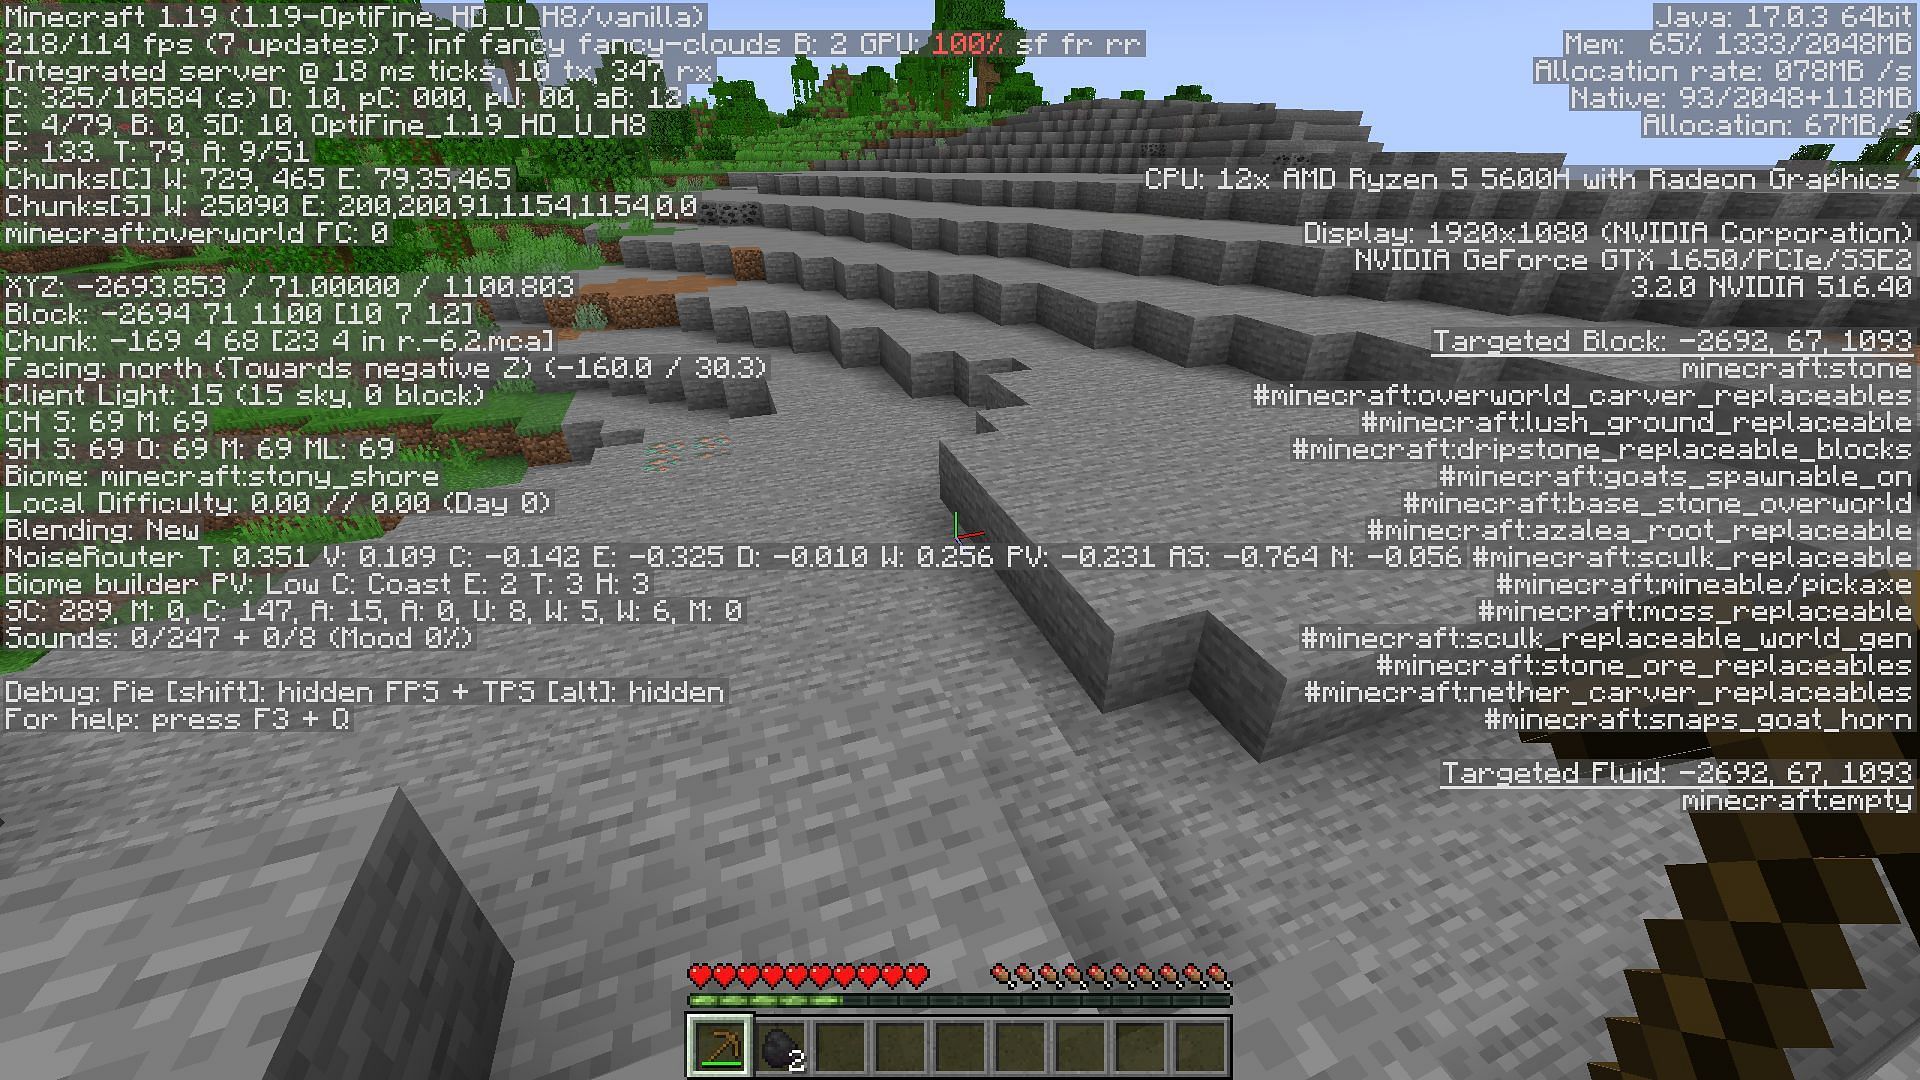 Players can check their coordinates by pressing the F3 button on Java Edition (Image via Minecraft 1.19 update)